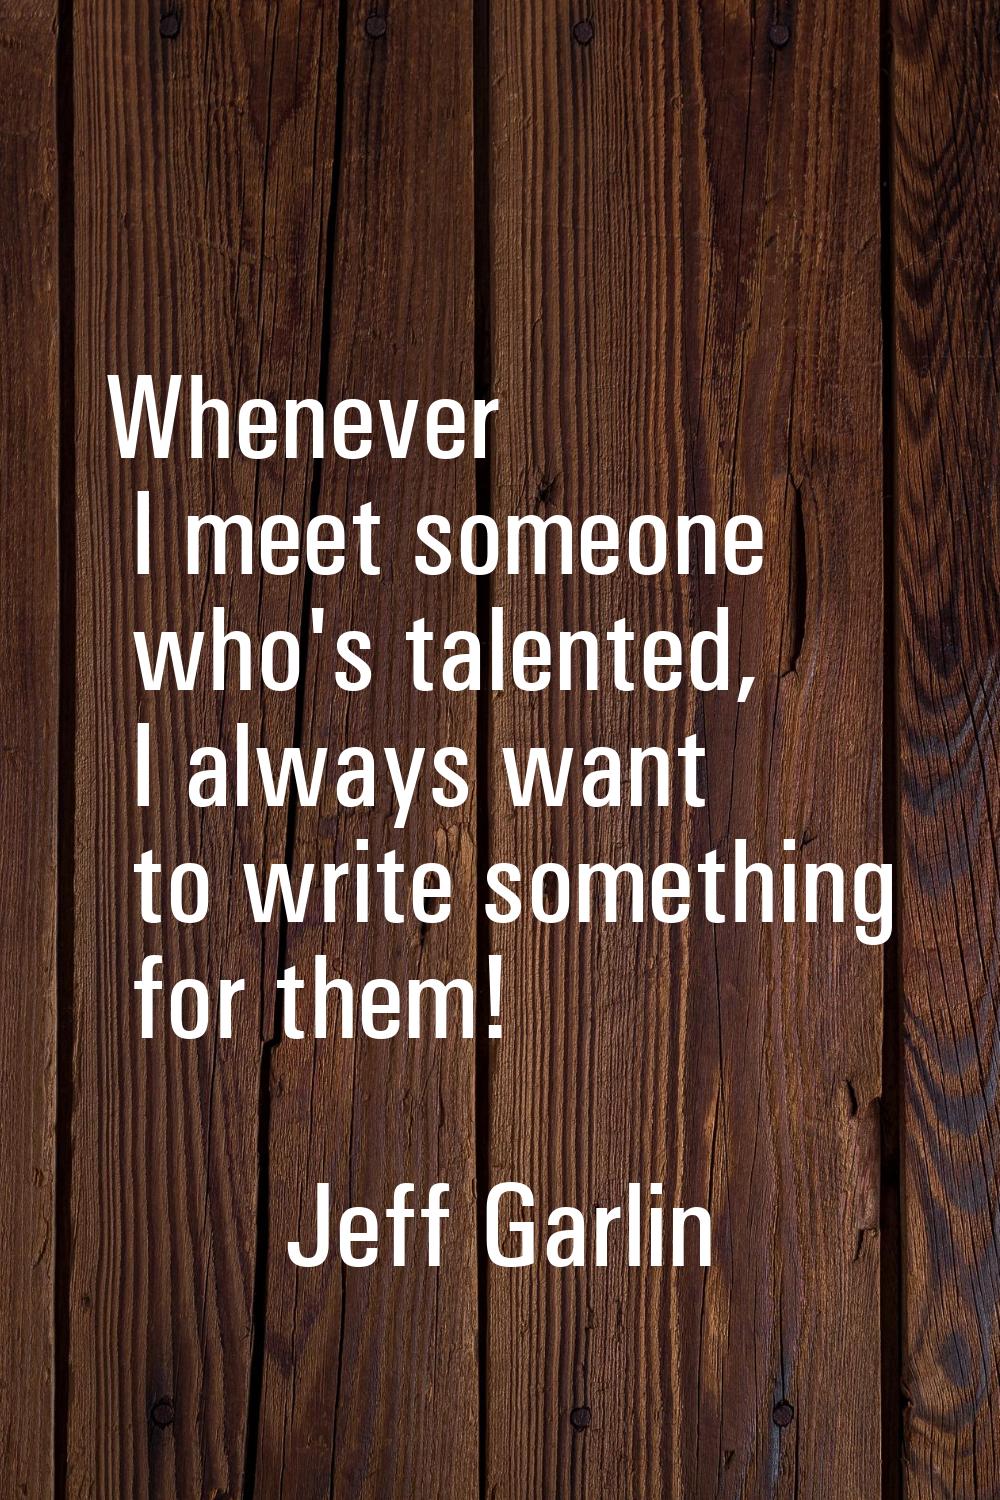 Whenever I meet someone who's talented, I always want to write something for them!